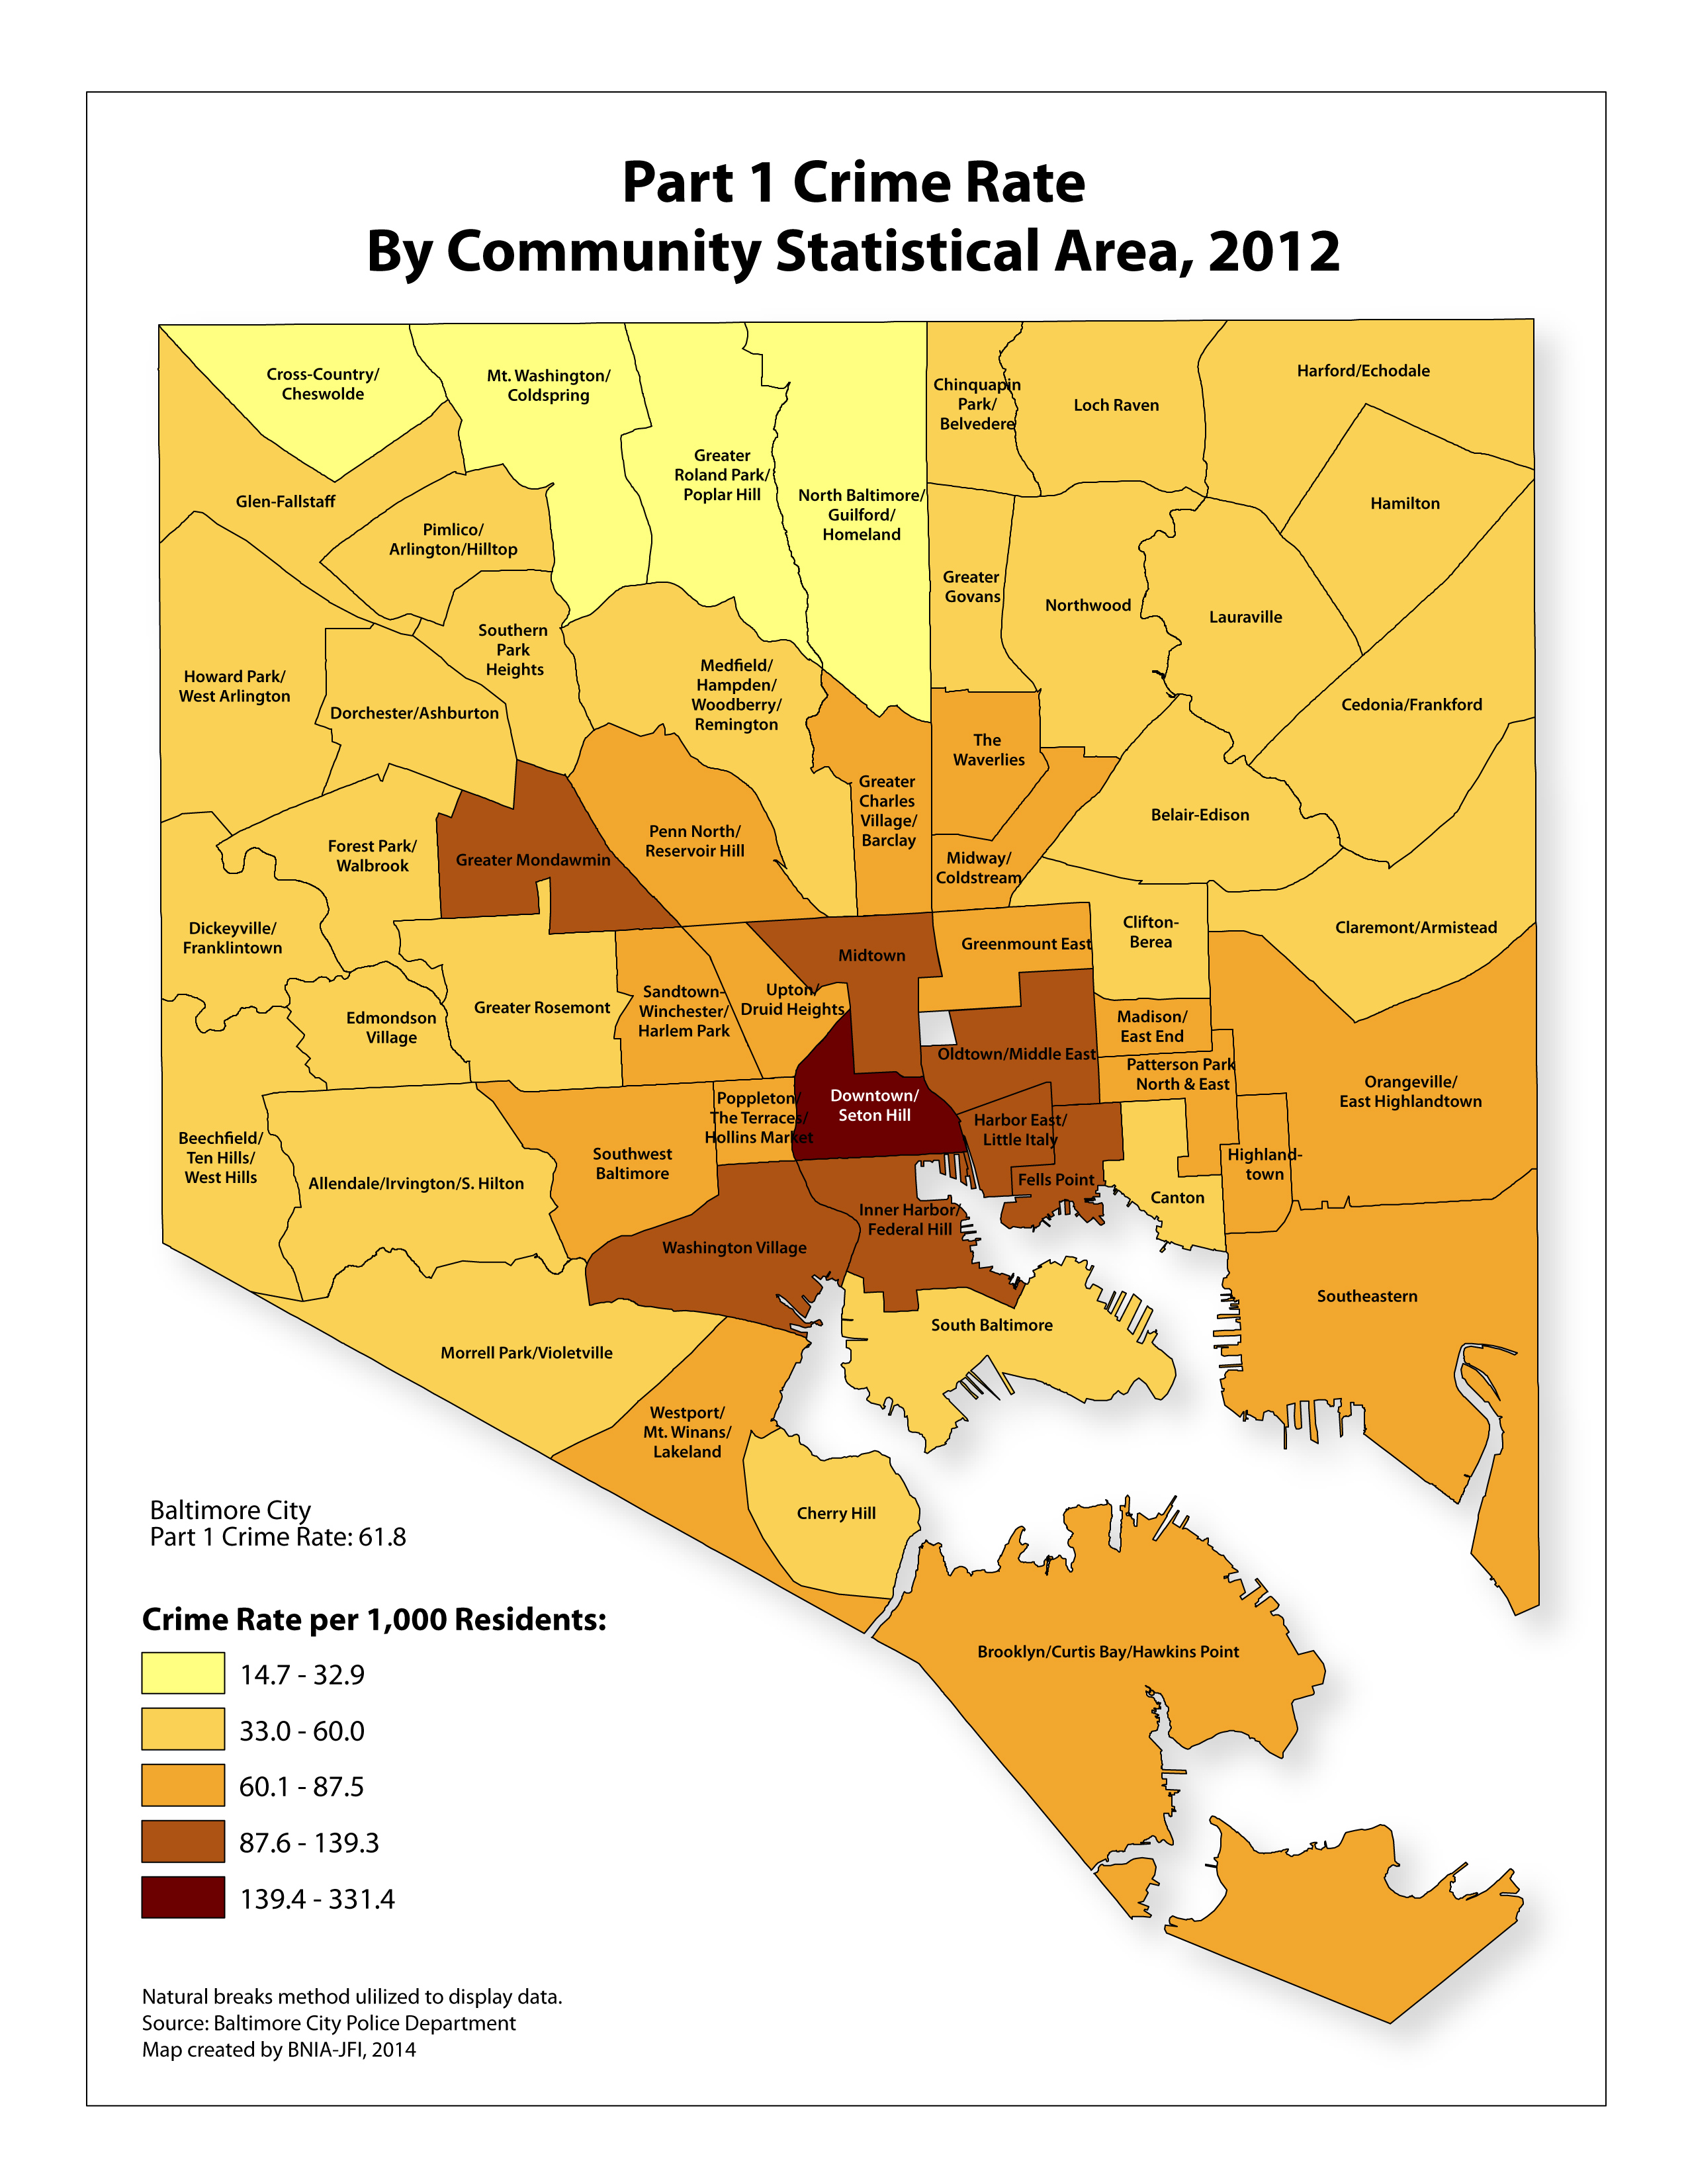 Gallery Vital Signs 12 Crime and Safety Maps BNIA Baltimore Neighborhood Indicators Alliance